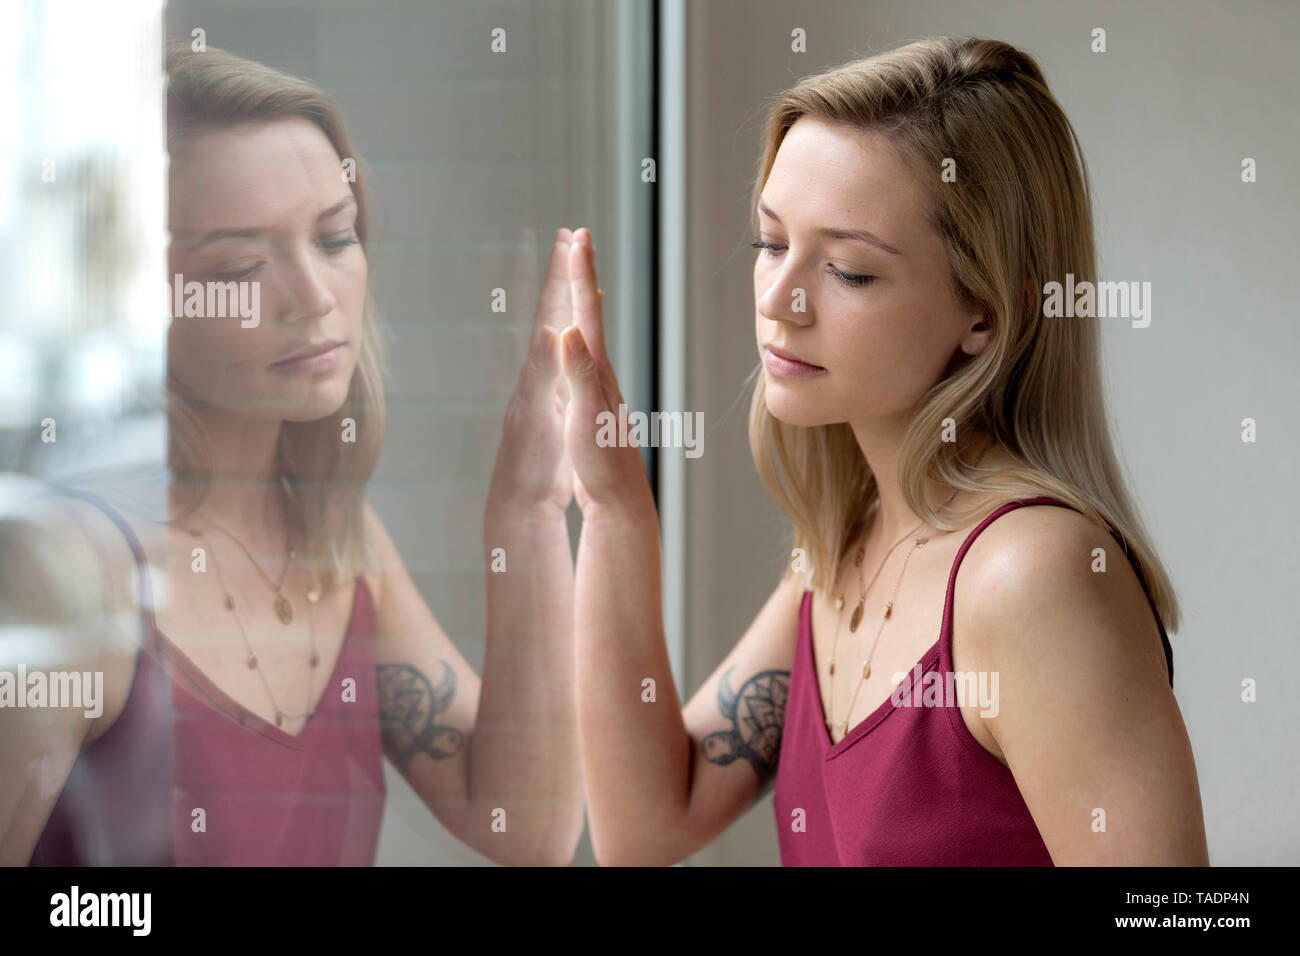 Portrait of blond young woman and her reflection on windowpane Stock Photo